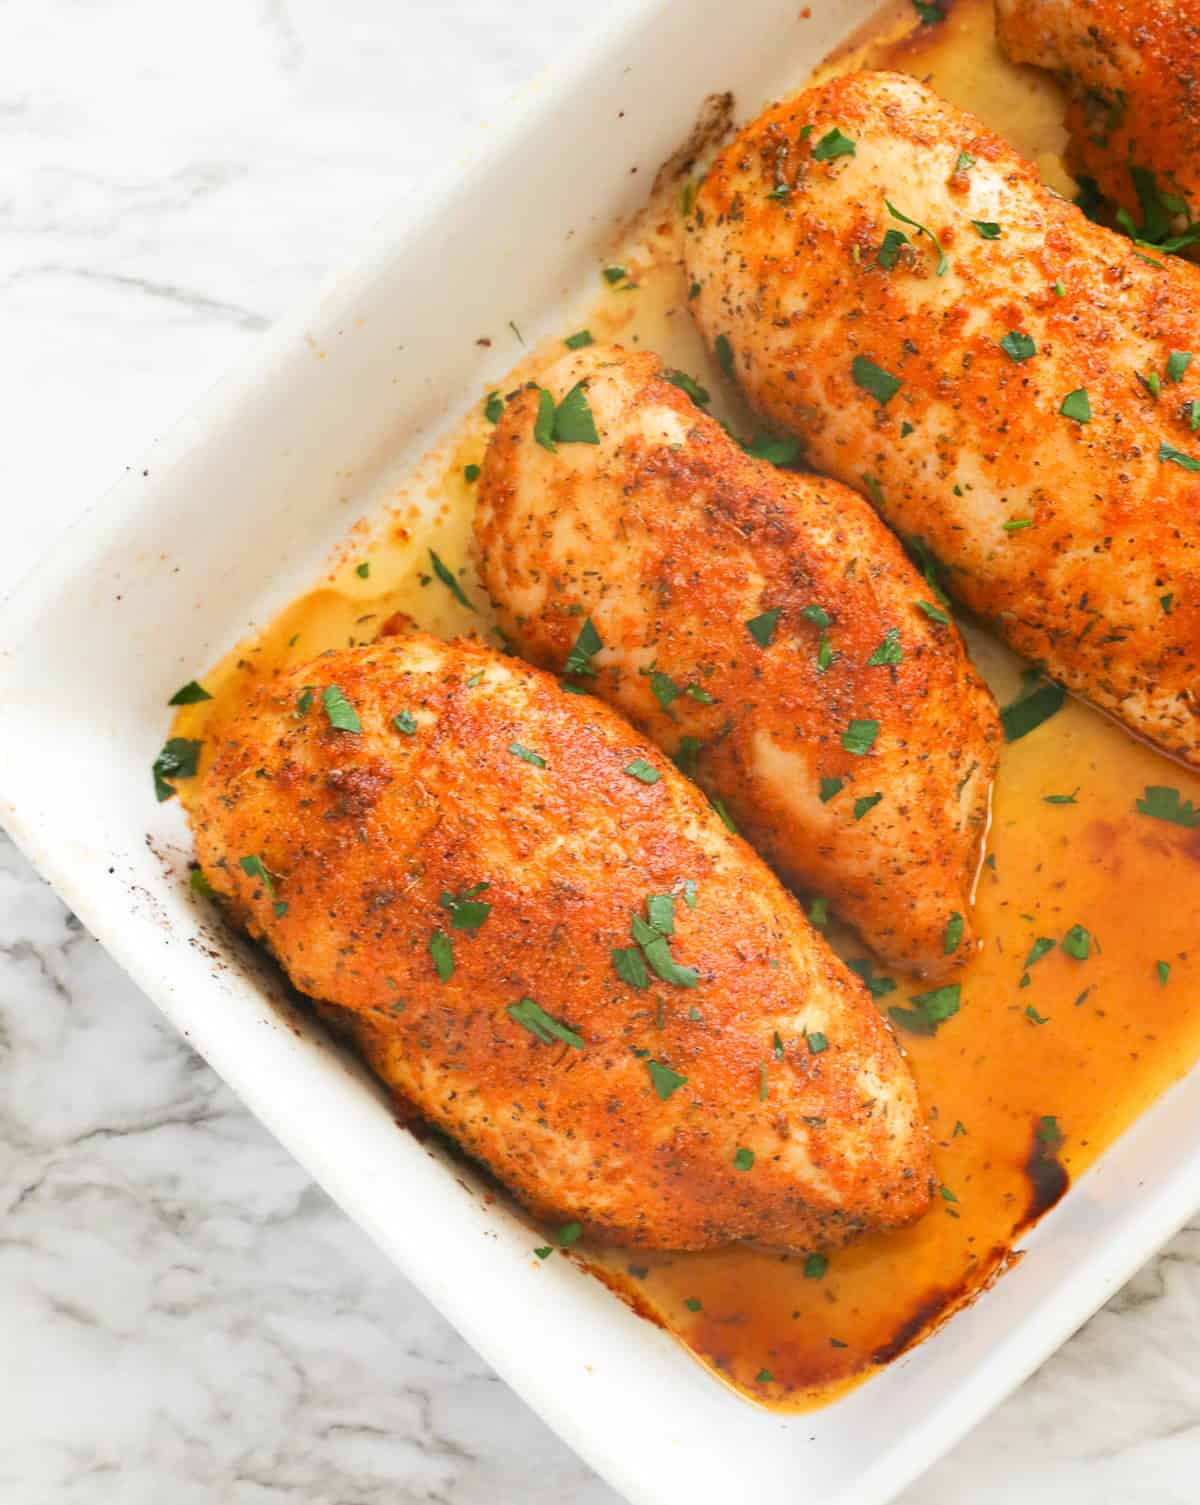 Super easy oven-baked chicken breast